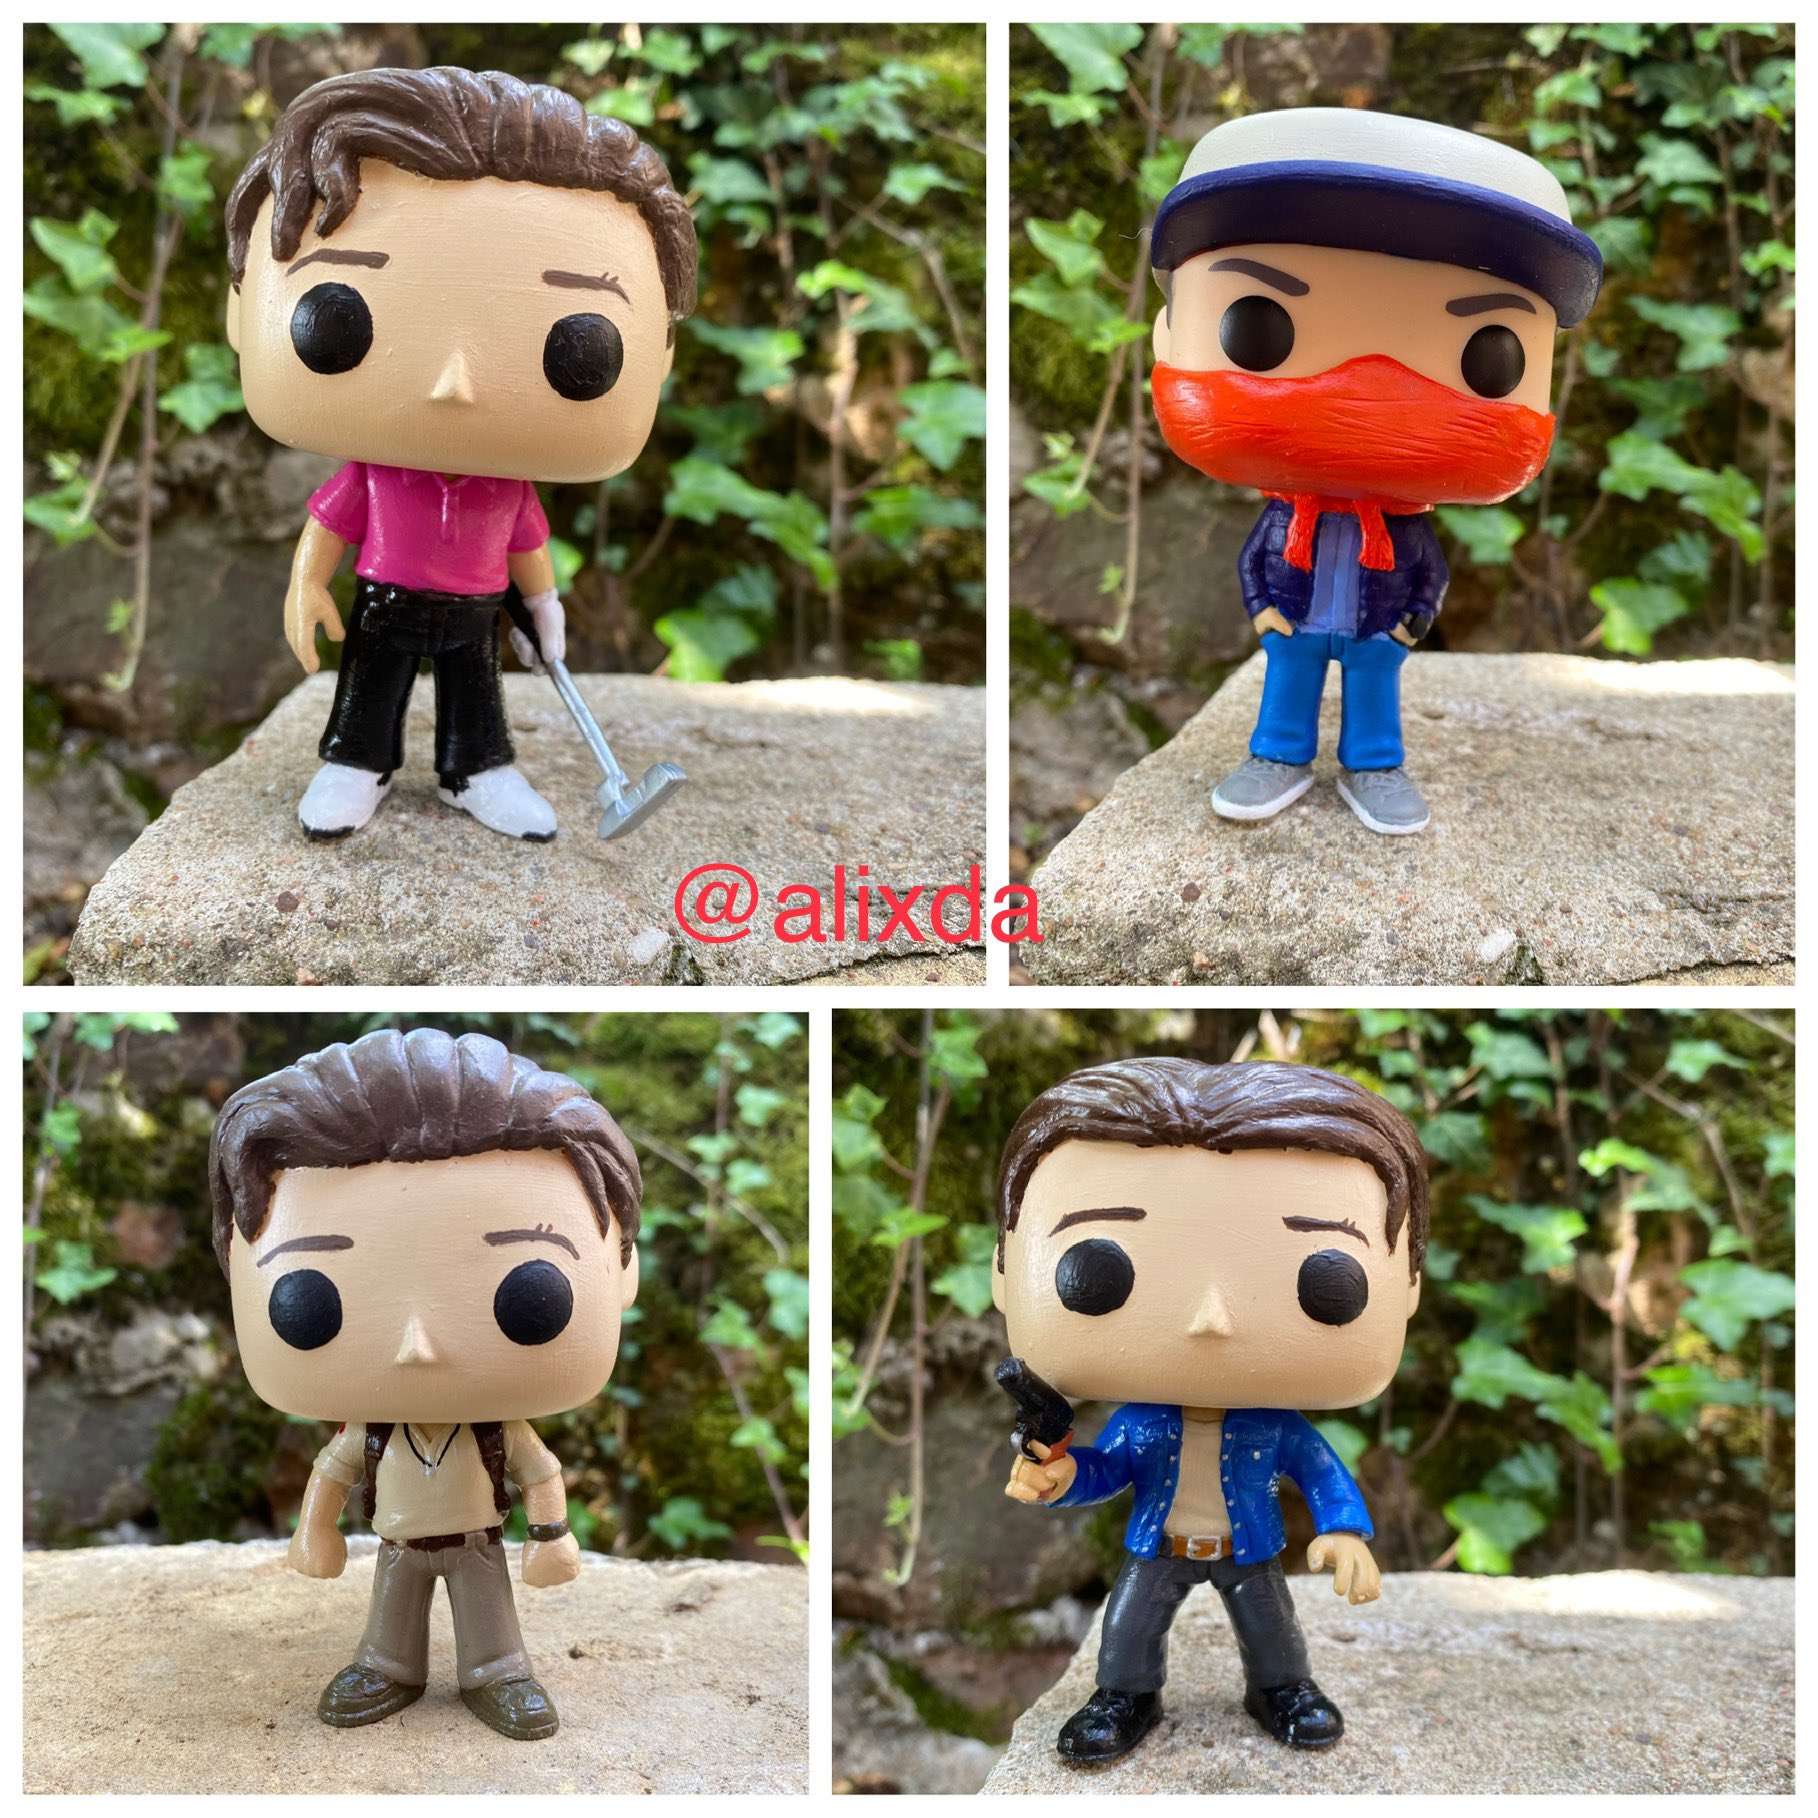 AlixD on Twitter: "My funko pop of Tom Holland !! ( golfing, Uncharted, The  devil all the time &amp; Cherry ). Let see if we can reach @TomHolland1996  On sale in my